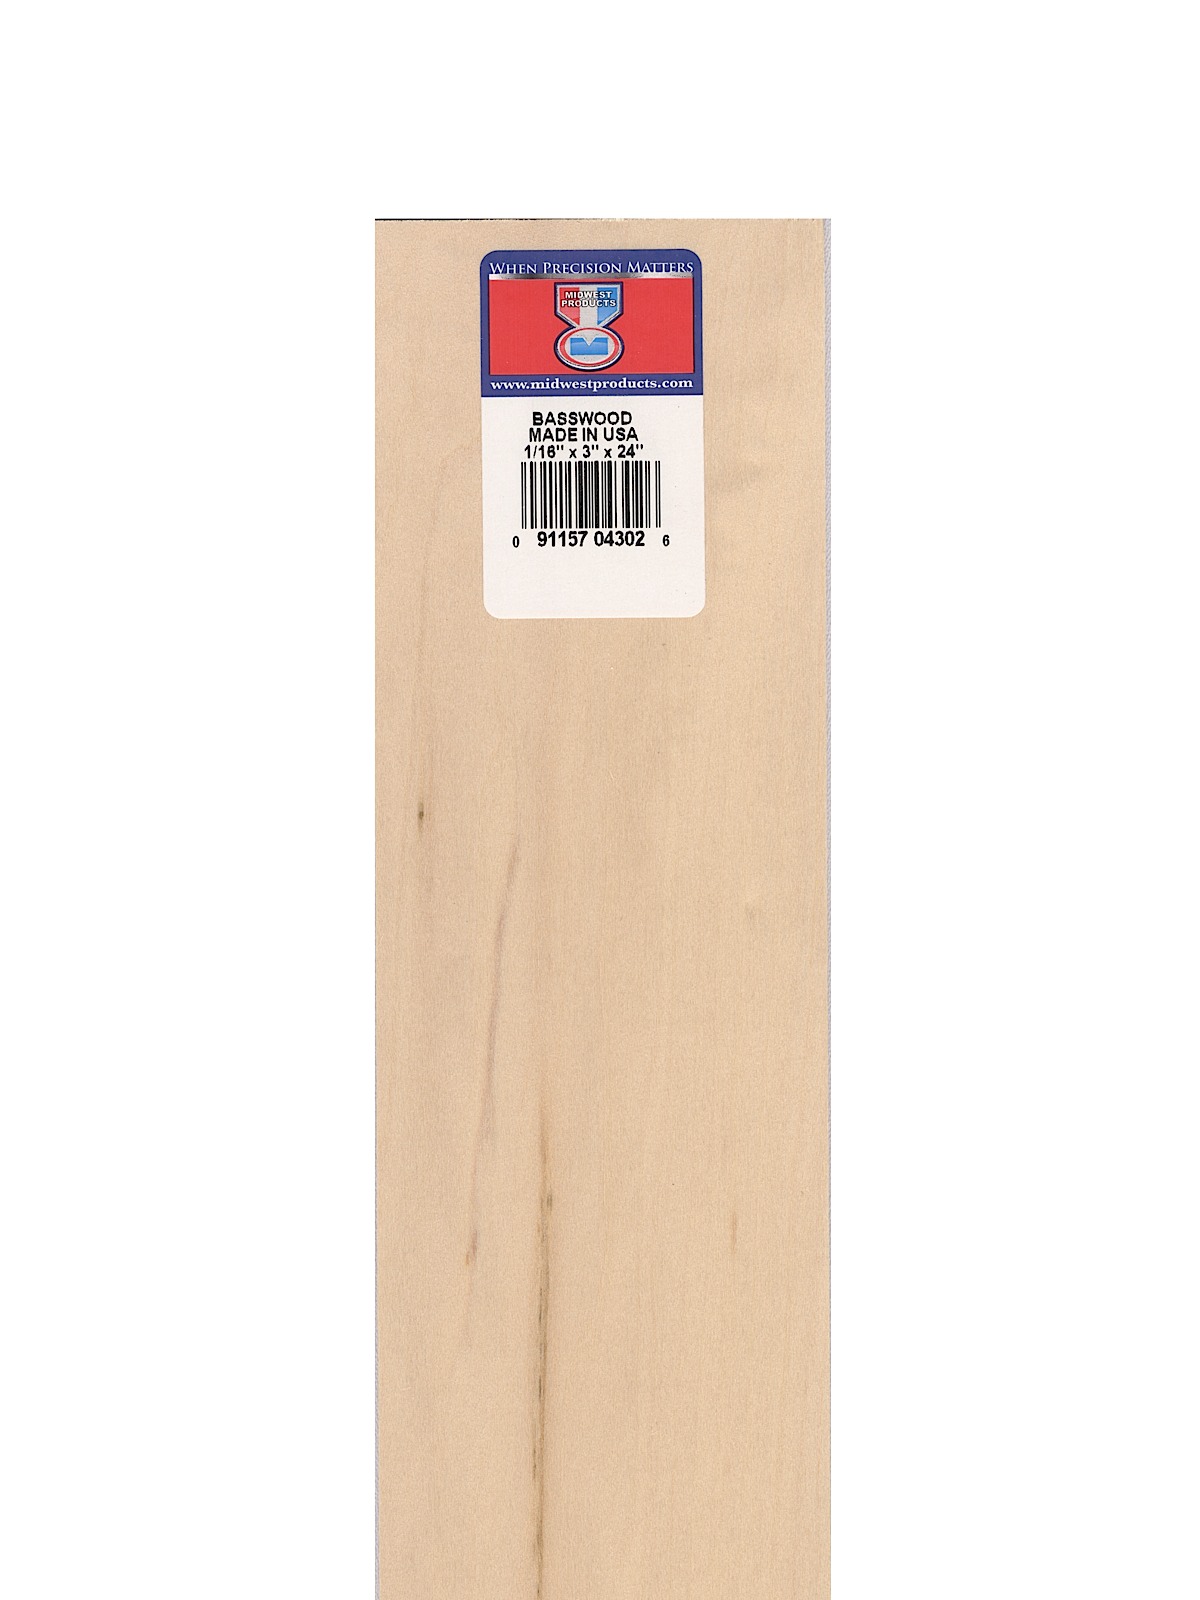 Basswood Sheets 1 16 In. 3 In. X 24 In.